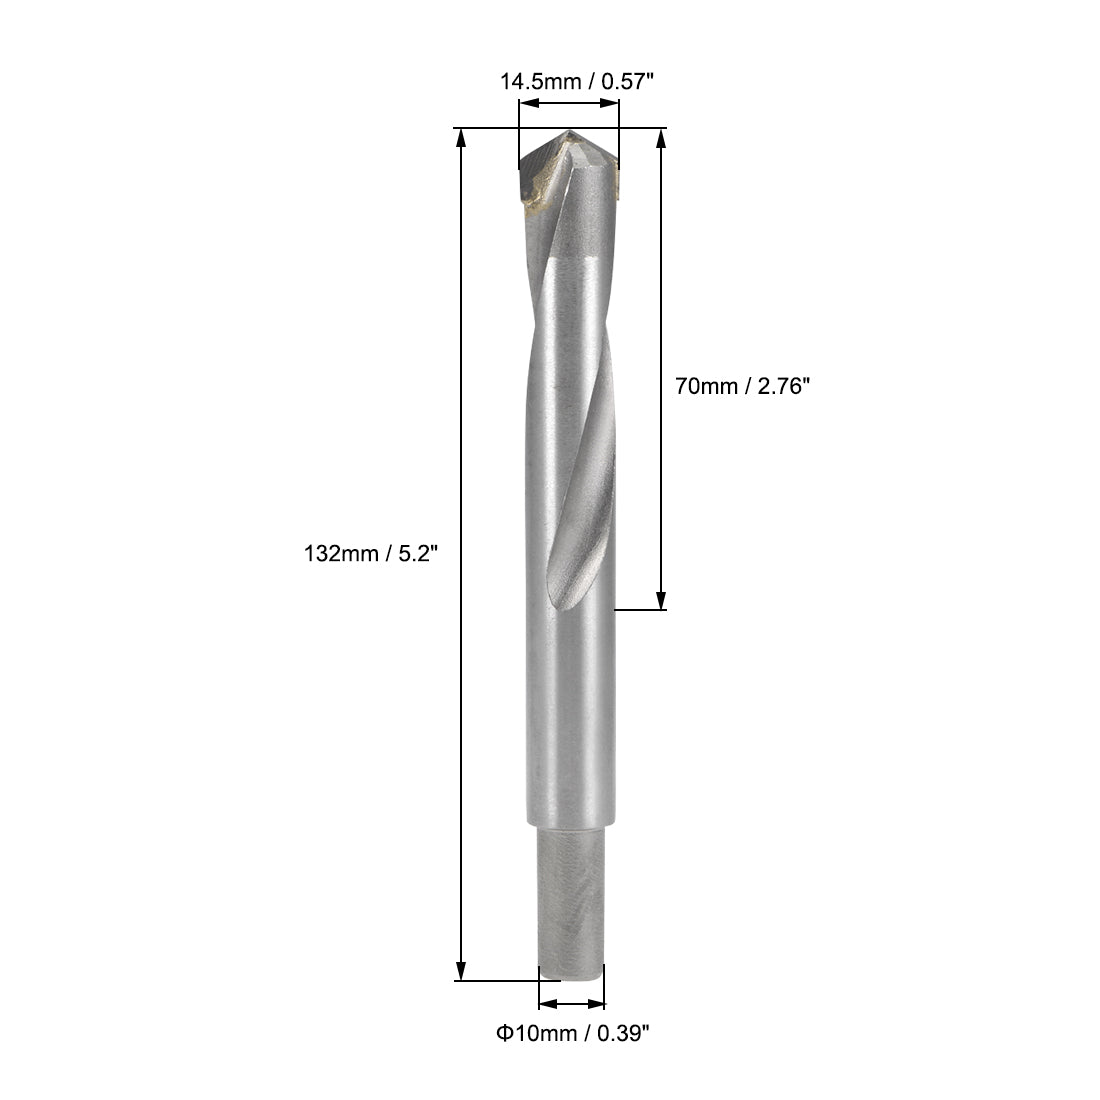 uxcell Uxcell 14.5mm Cemented Carbide Twist Drill Bit for Stainless Steel Copper Aluminum 2Pcs